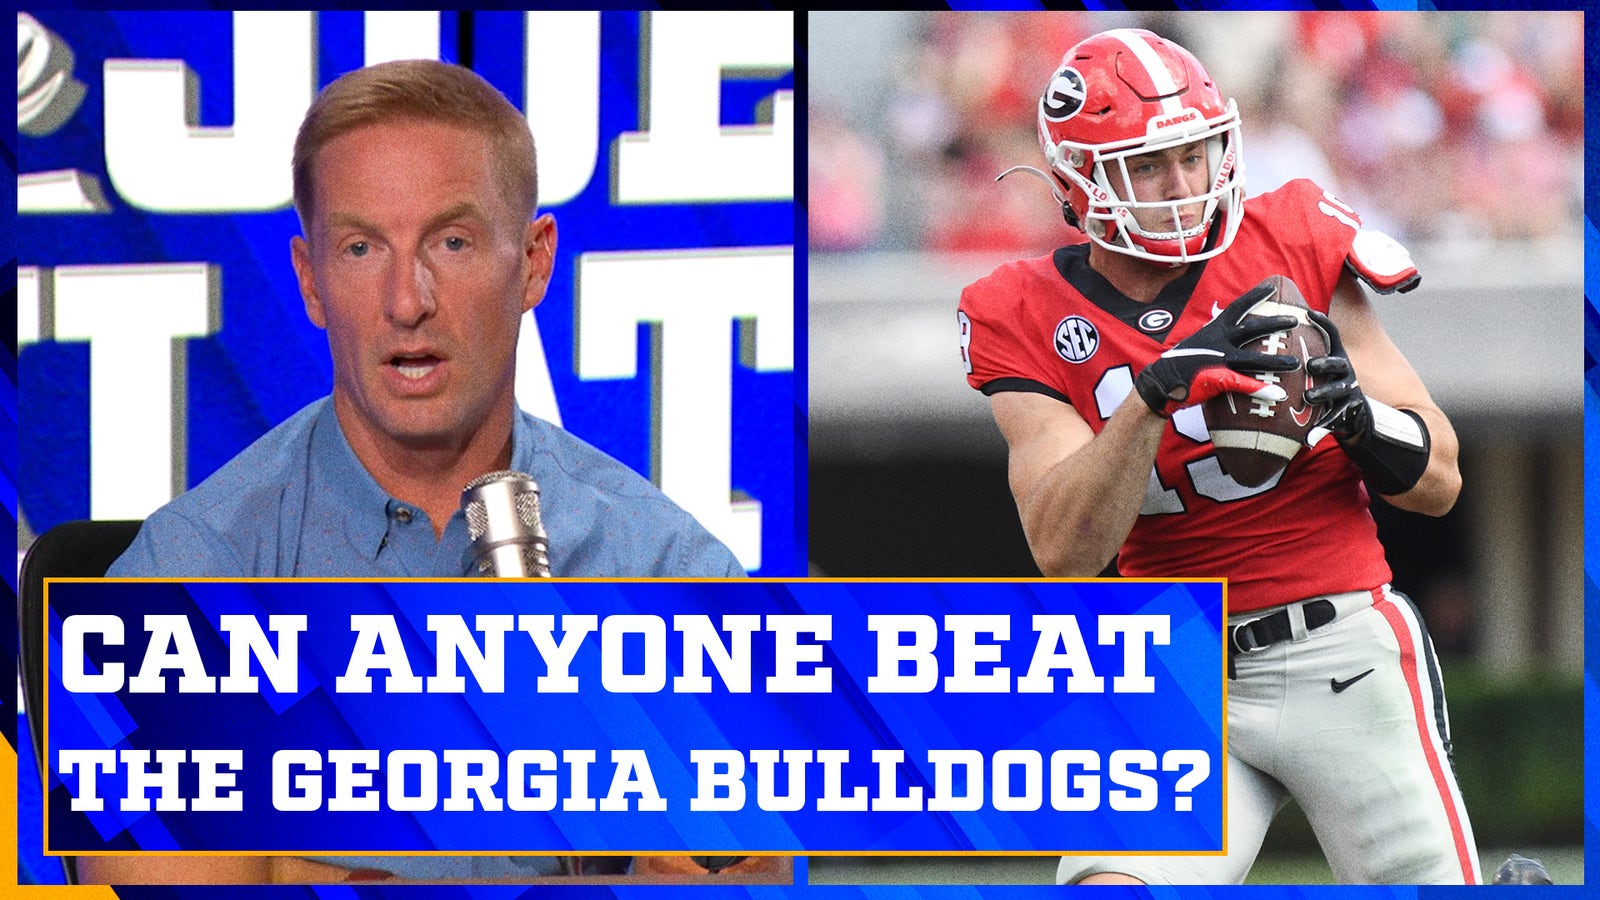 Can the Georgia Bulldogs be stopped?